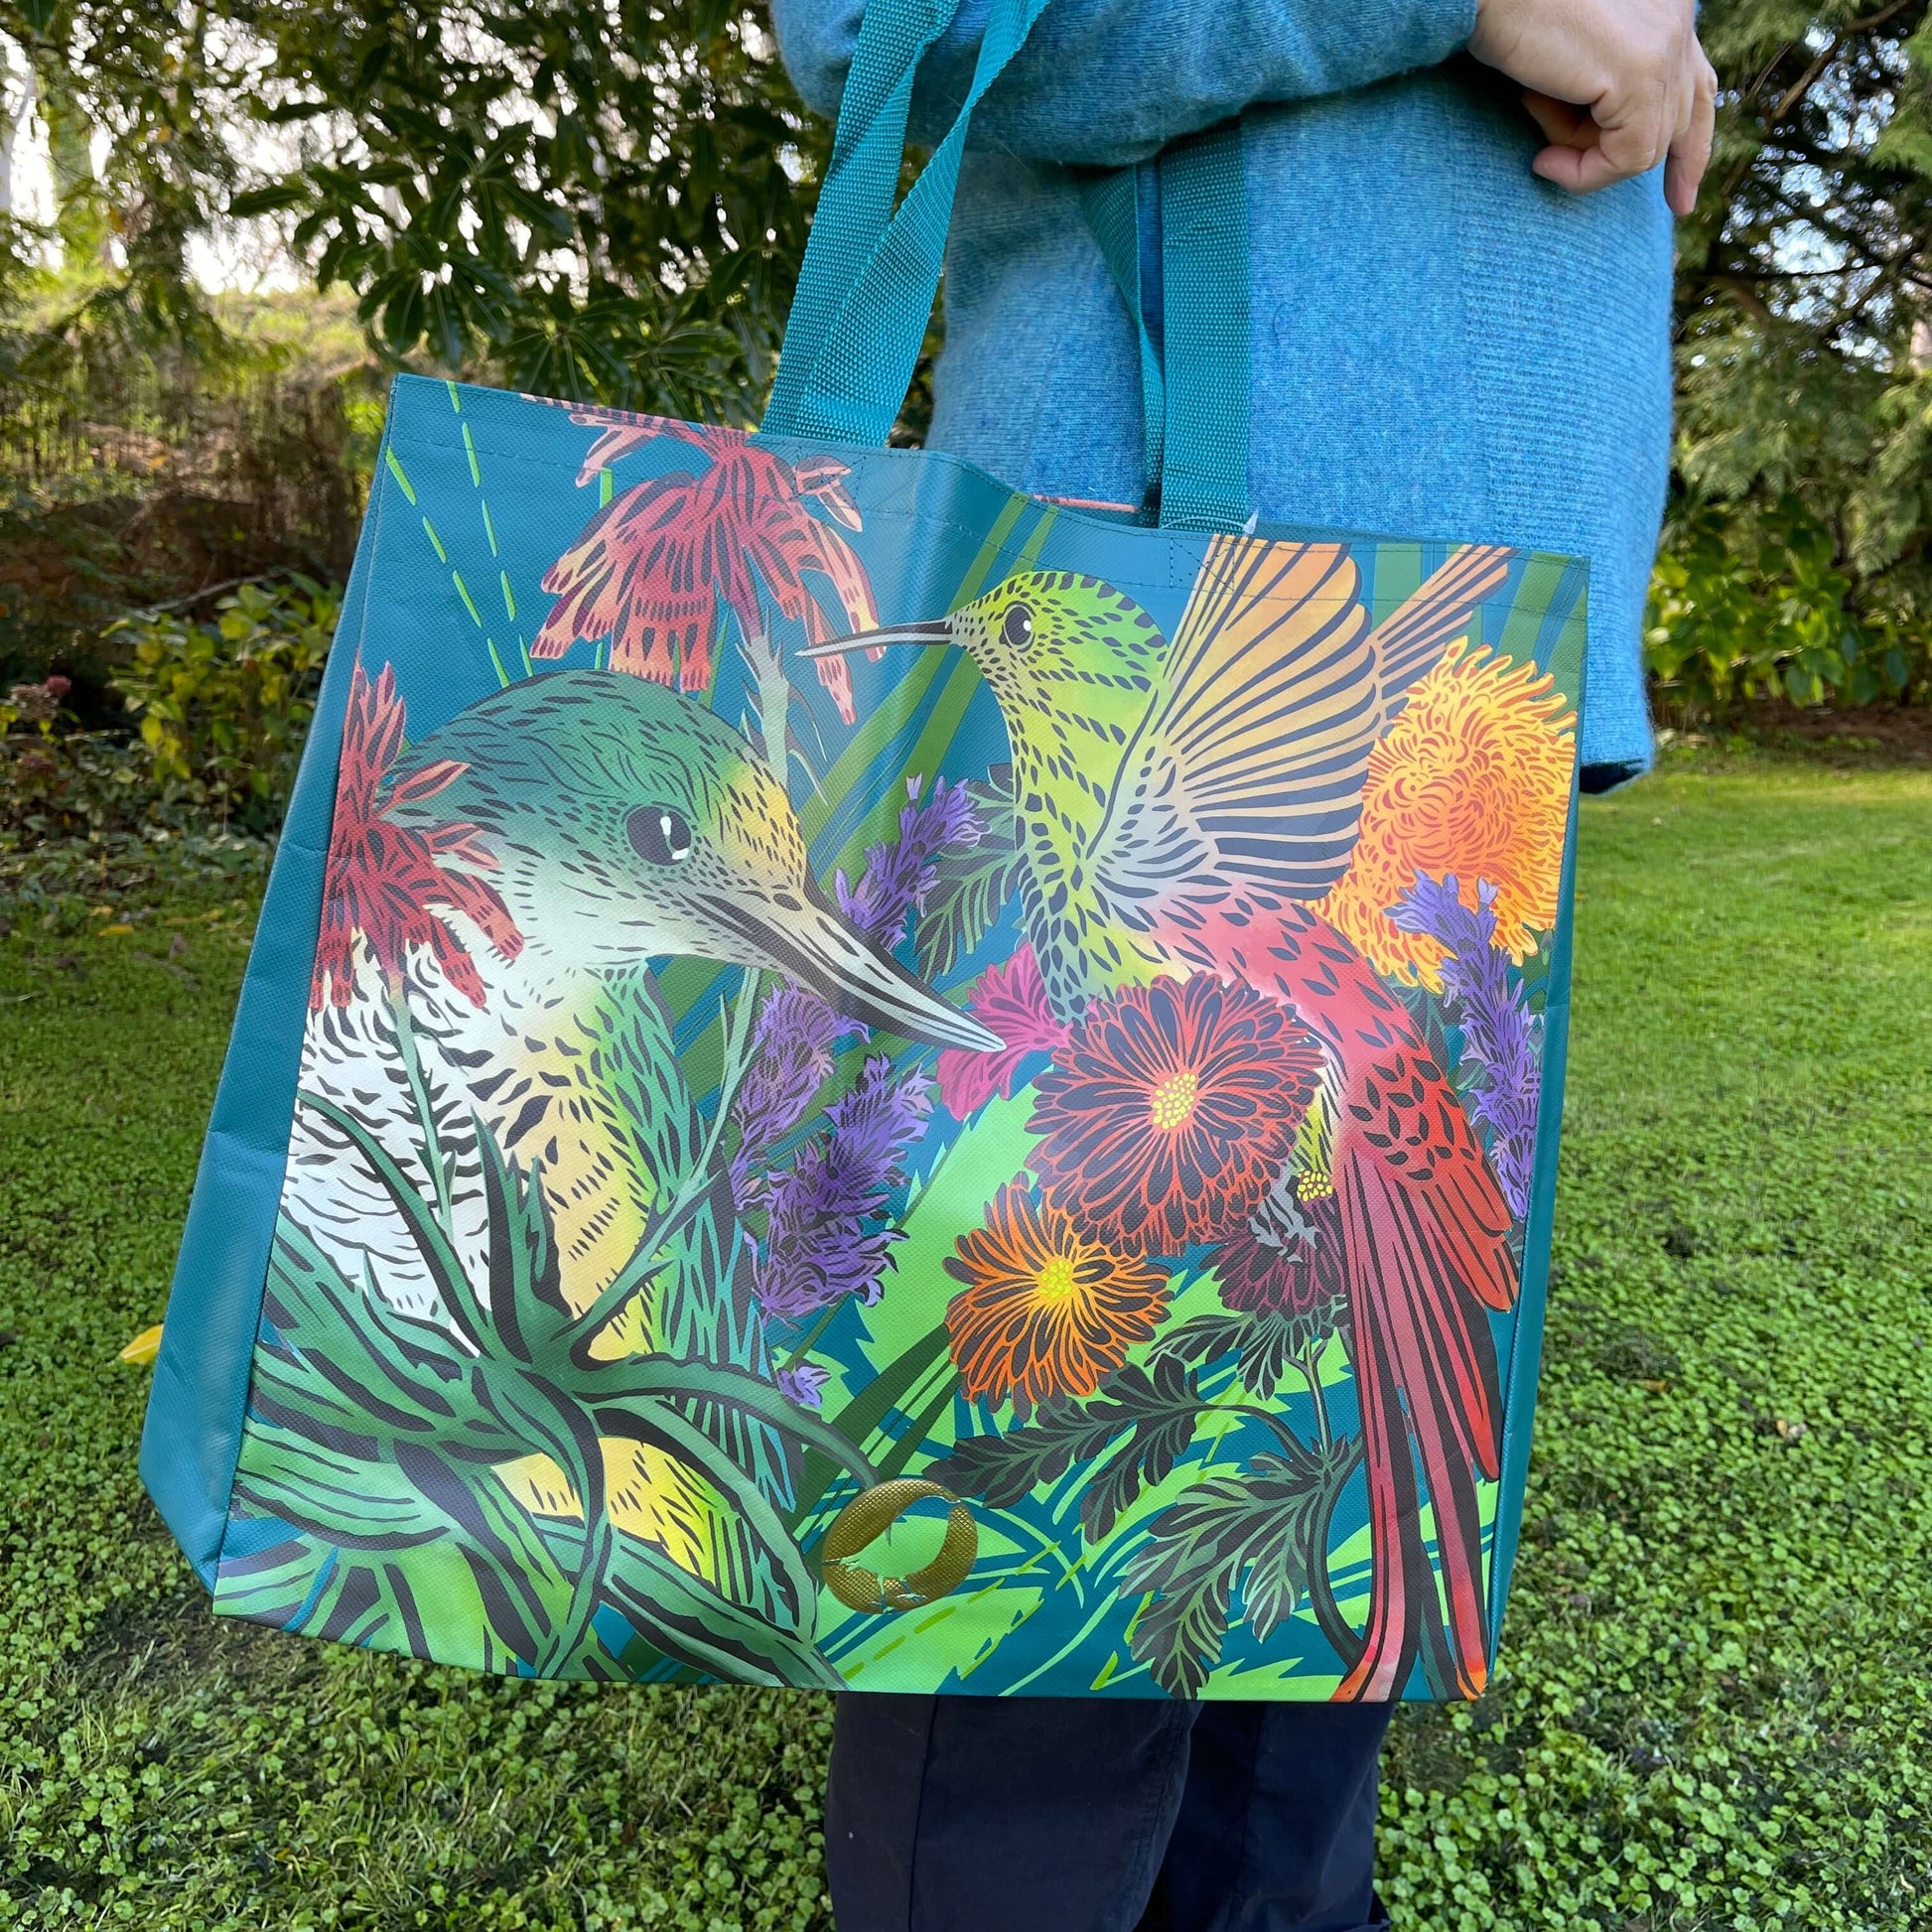 Woman with a tote bag over her arm. The vibrant coloured tote bag features birds & flowers by artist Flox.